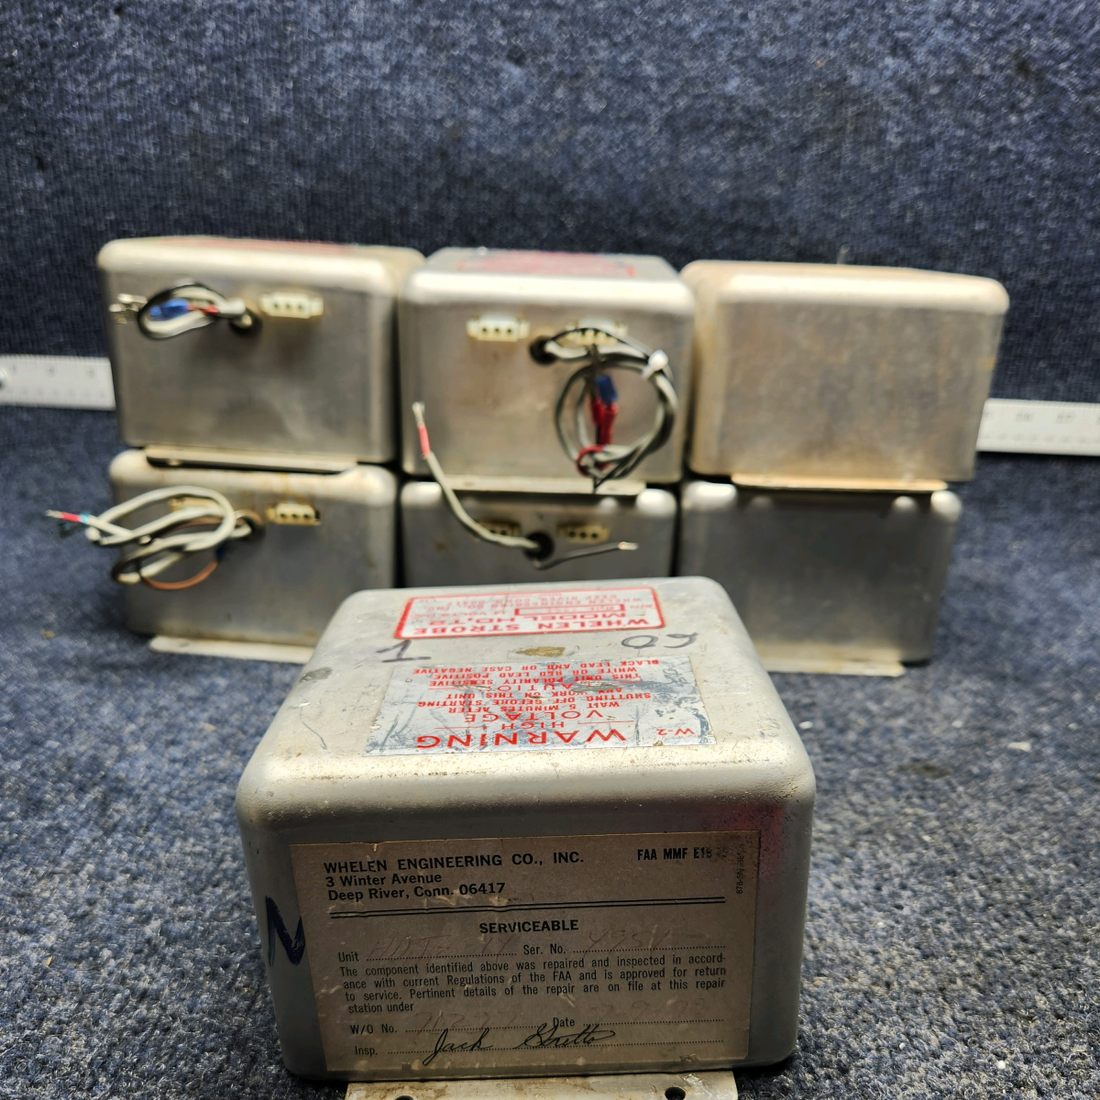 Used aircraft parts for sale, A413,T2-14 Whelen Strobe Power Supply WHELEN STROBE LIGHT POWER SUPPLY "FOR PARTS ONLY" 14VOLTS